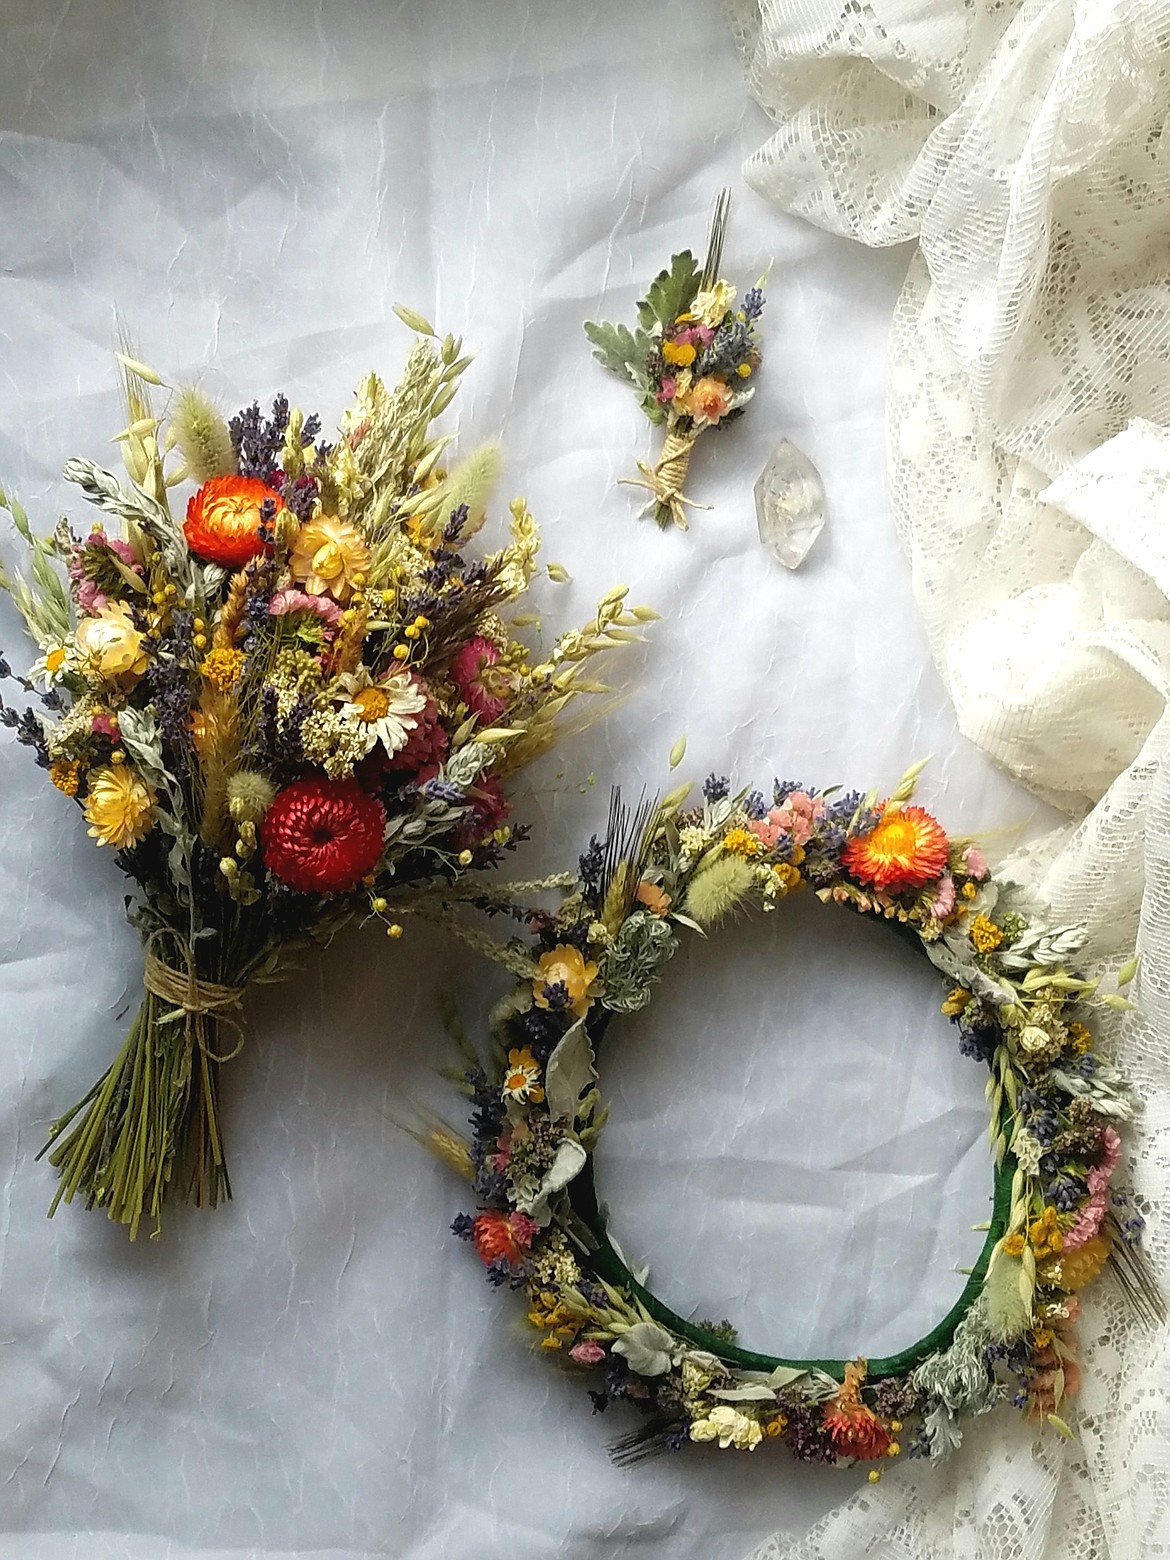 Kelly's online Etsy shop features ornate dried flower bouquets, boutonnieres, and crown head pieces for weddings, as well as one of a kind flower rings, and also an array of home decor items too. (Photo courtesy Eryn Kelly)